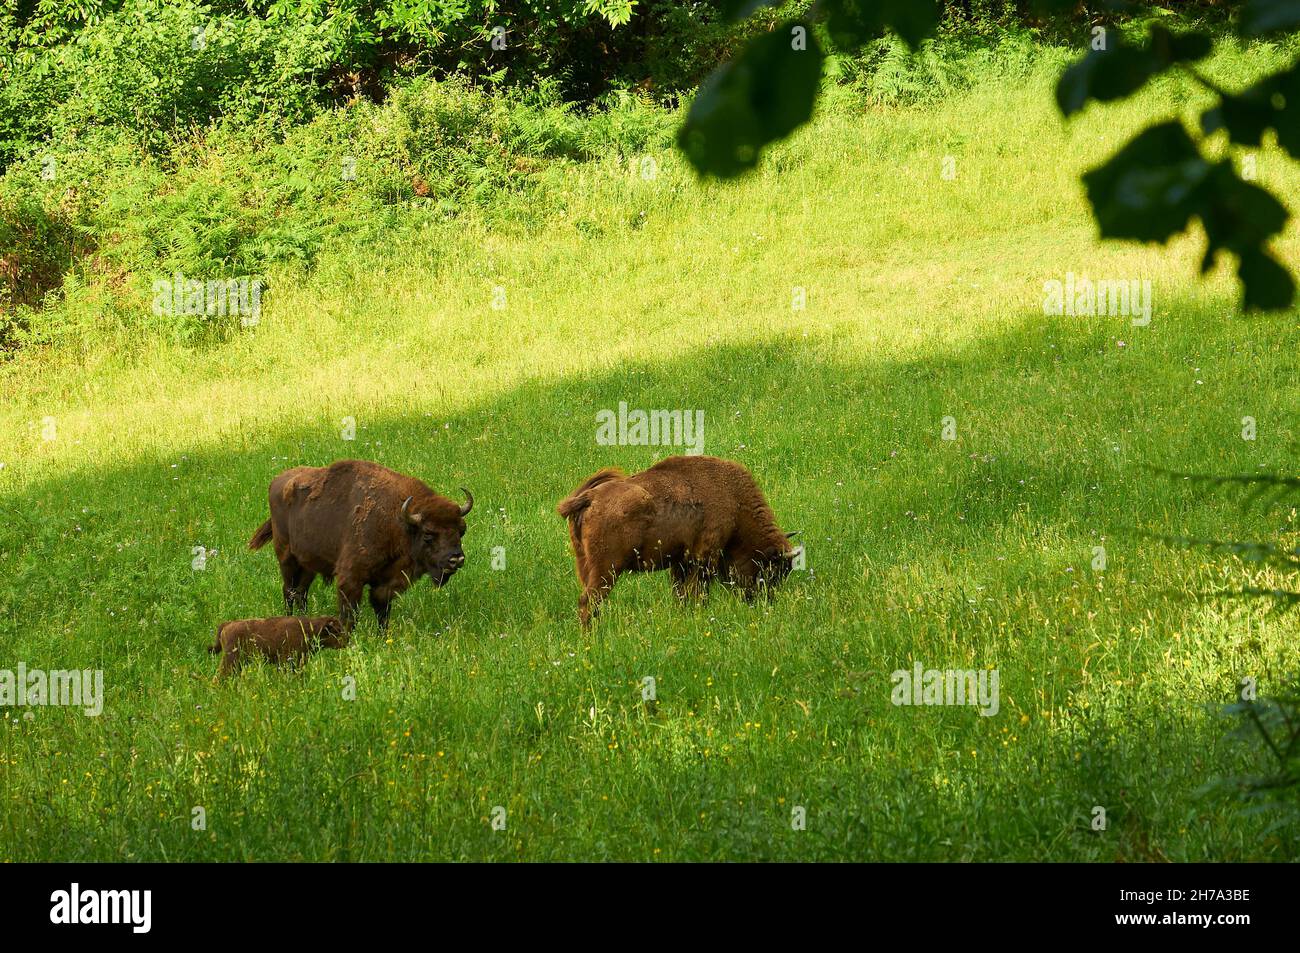 European bisons (Bison bonasus), named Lipión and Pipa, with their newly born calf, grazing at the Prehistoric Park of Teverga (Asturias, Spain) Stock Photo